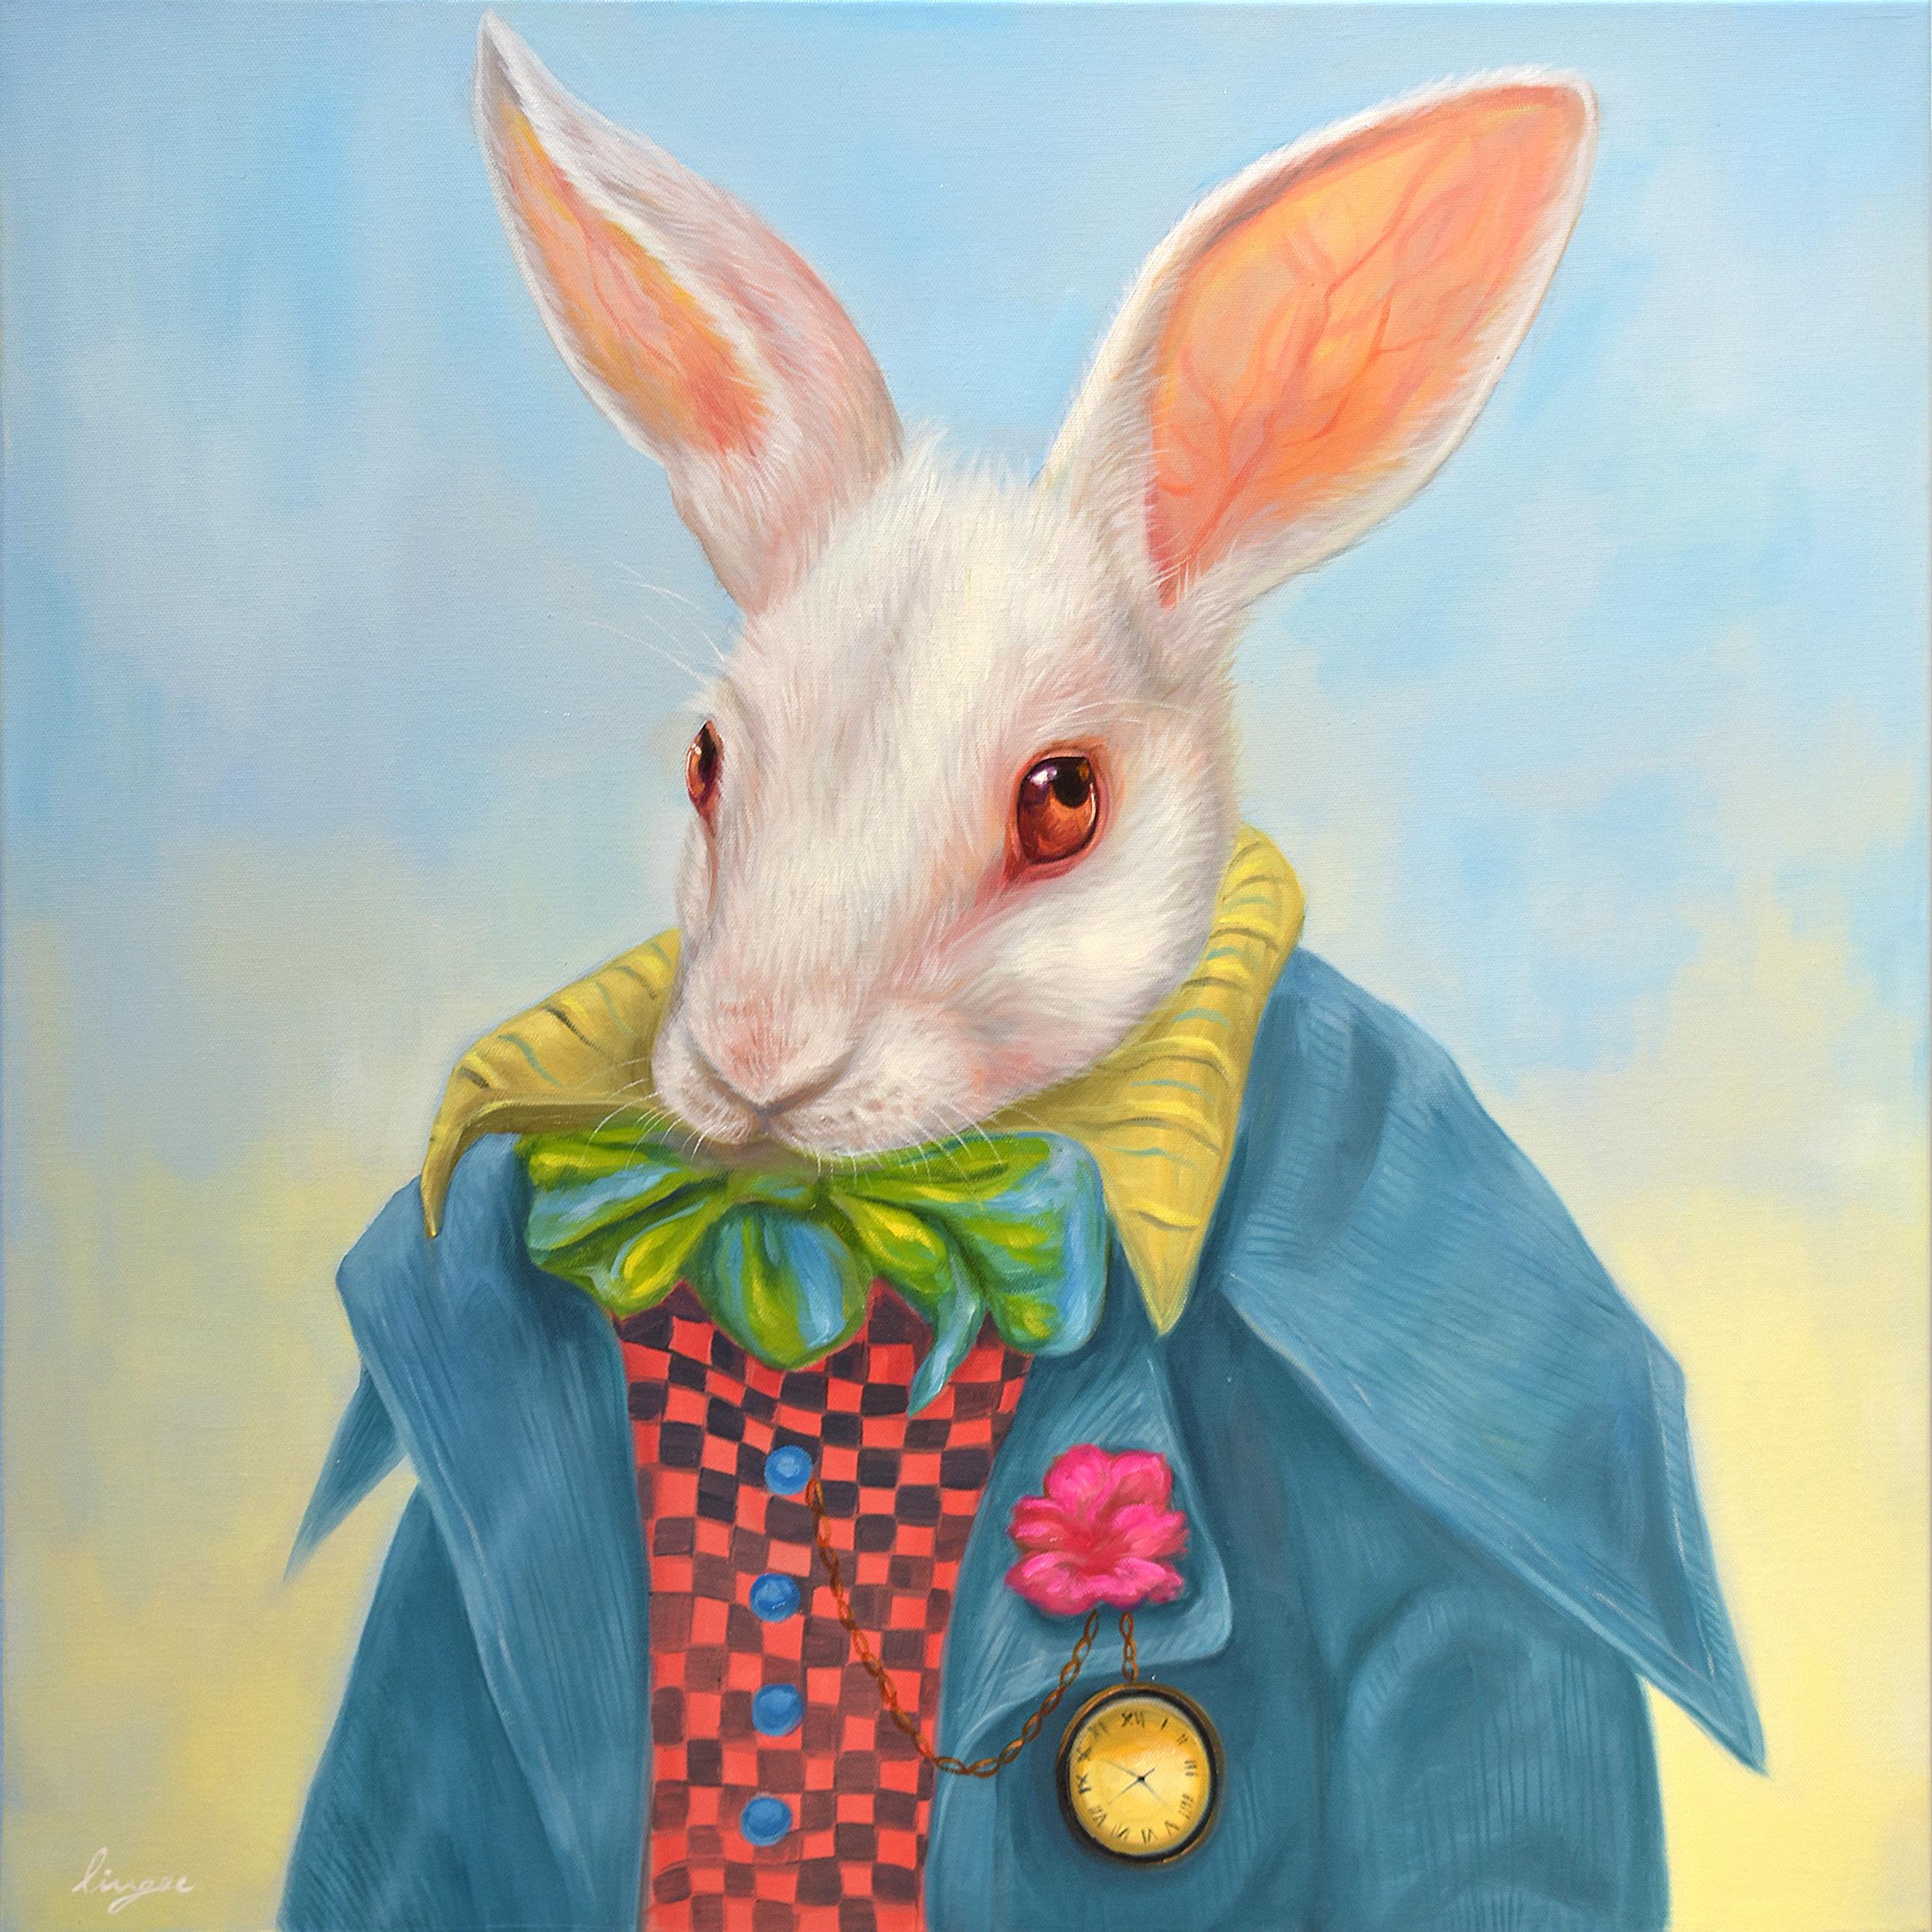 Lingee Bangkhuntod Animal Painting - Dapper Rabbits - Young Buck. Rabbit in Vintage Clothing. Oil Painting